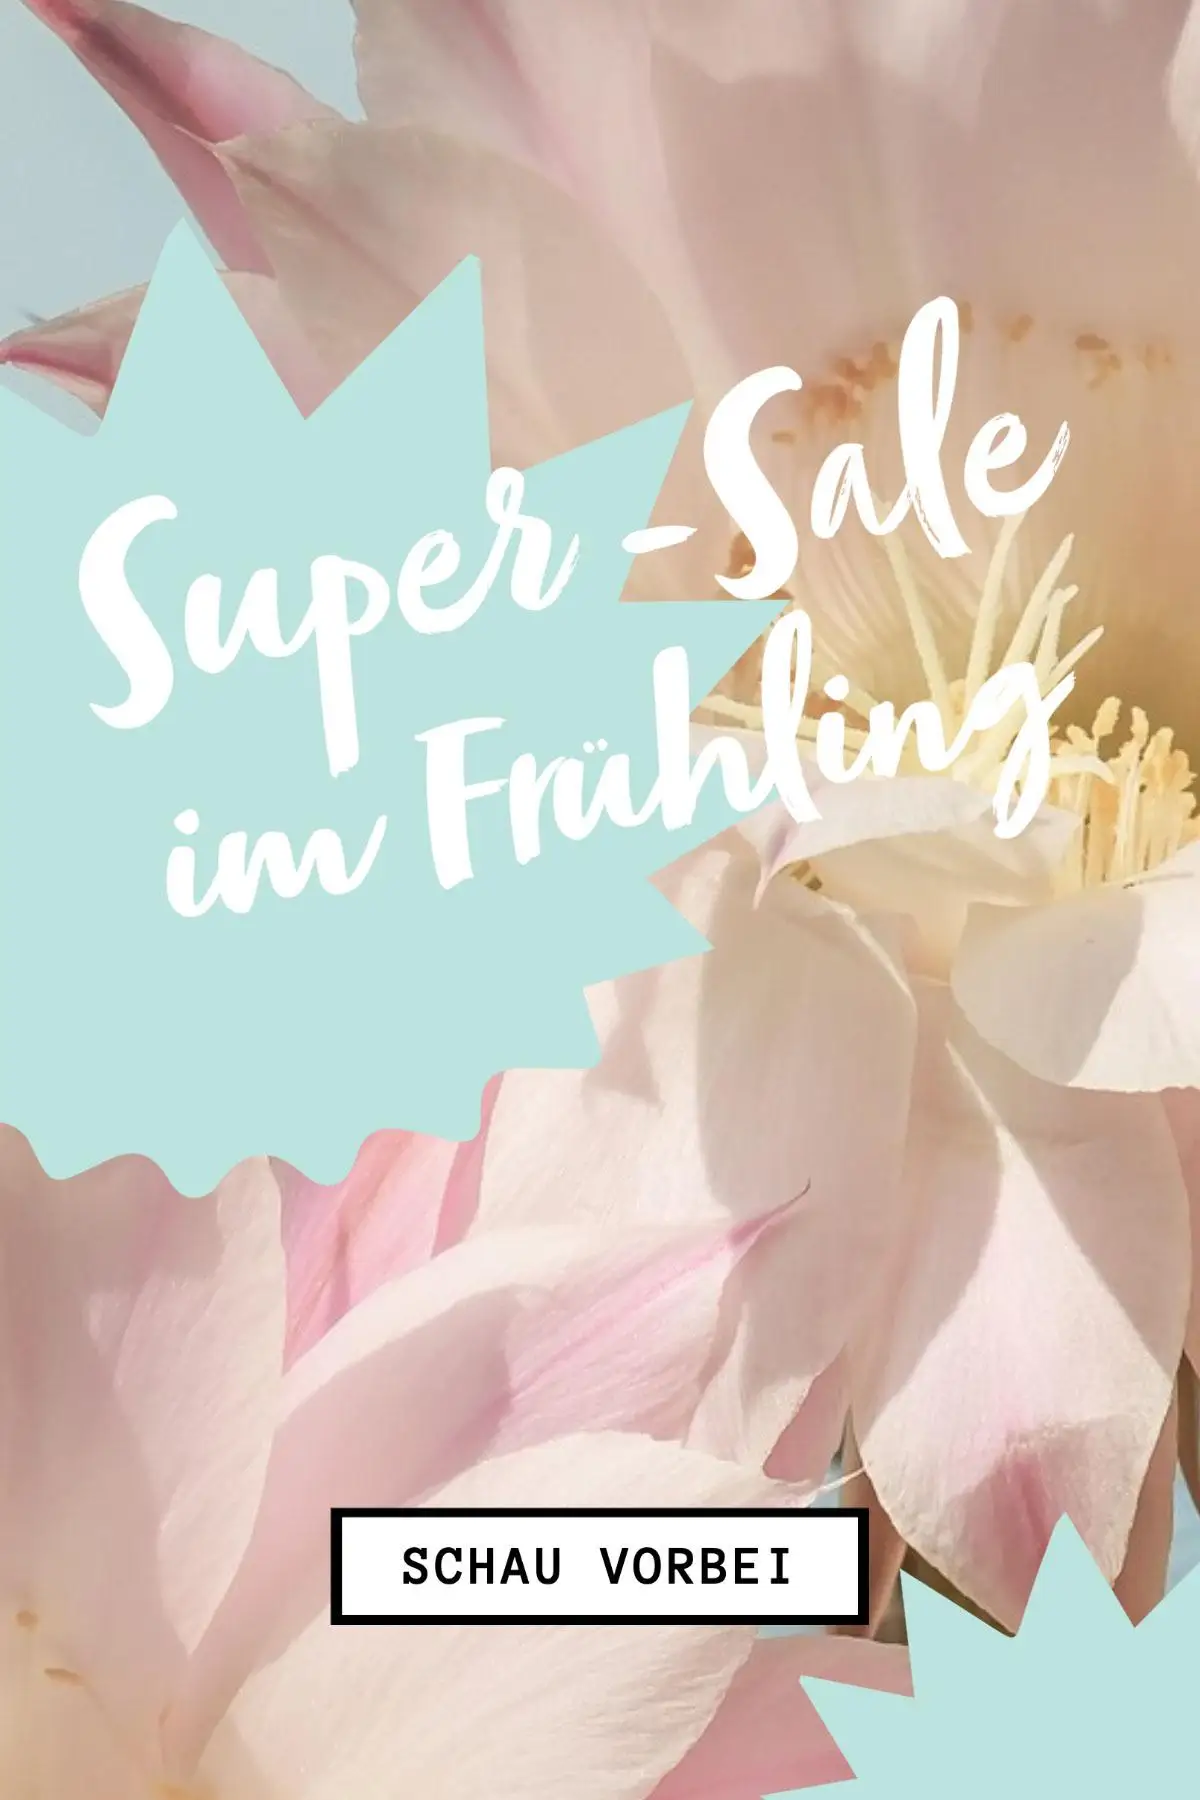 Turquoise White Super Sale Spring Flowers Pinterest Ad